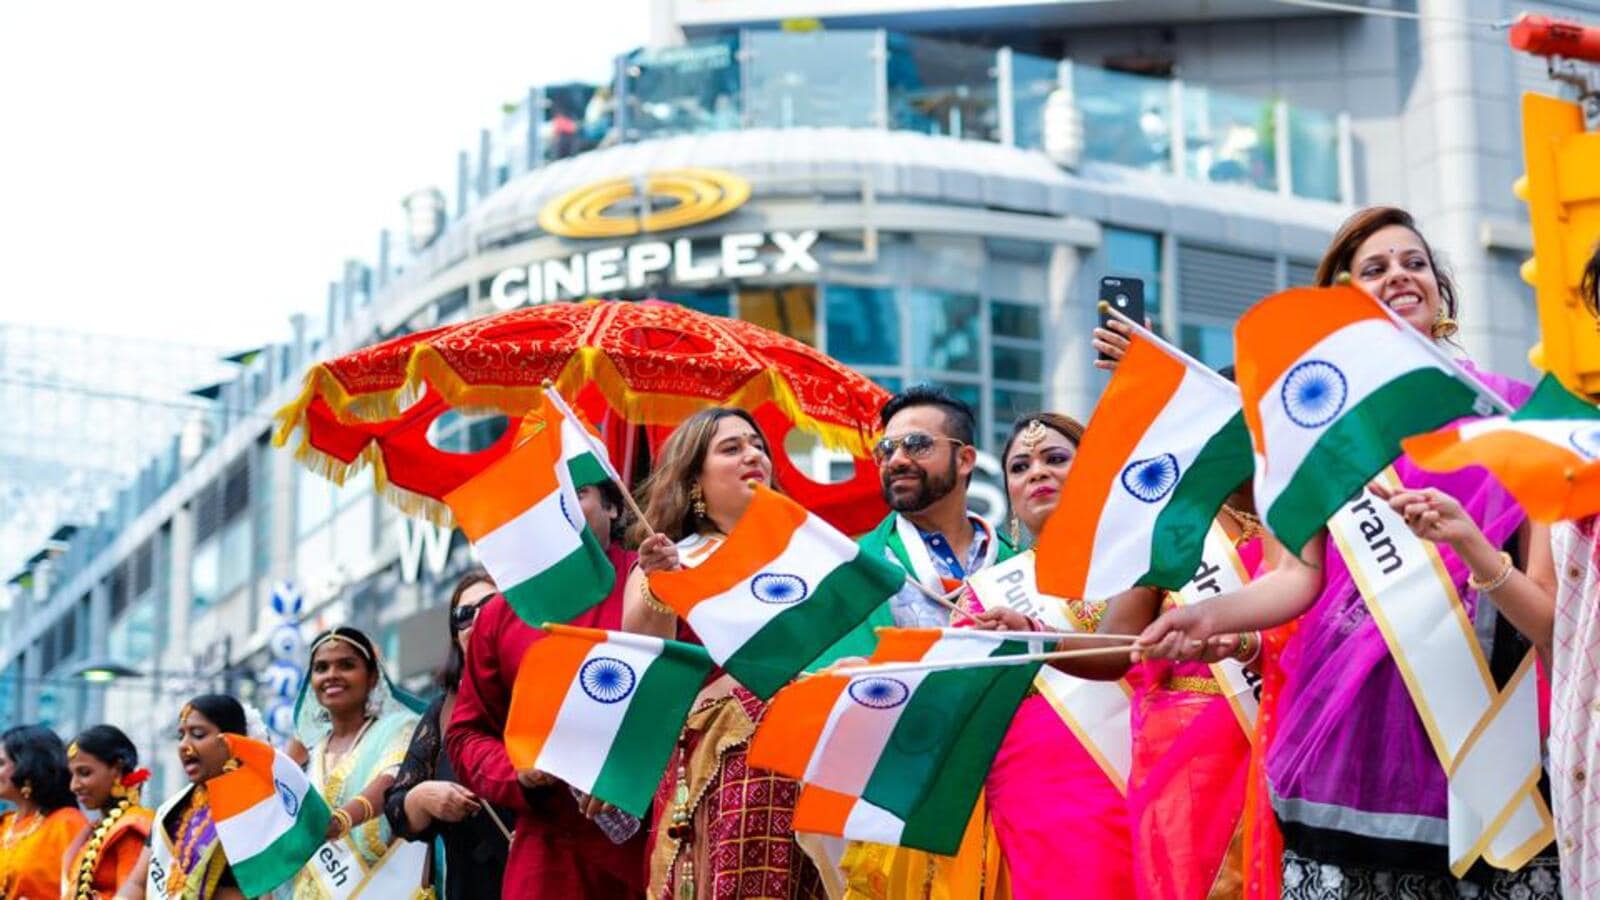 India asks Canada to ensure security at Independence Day celebration events